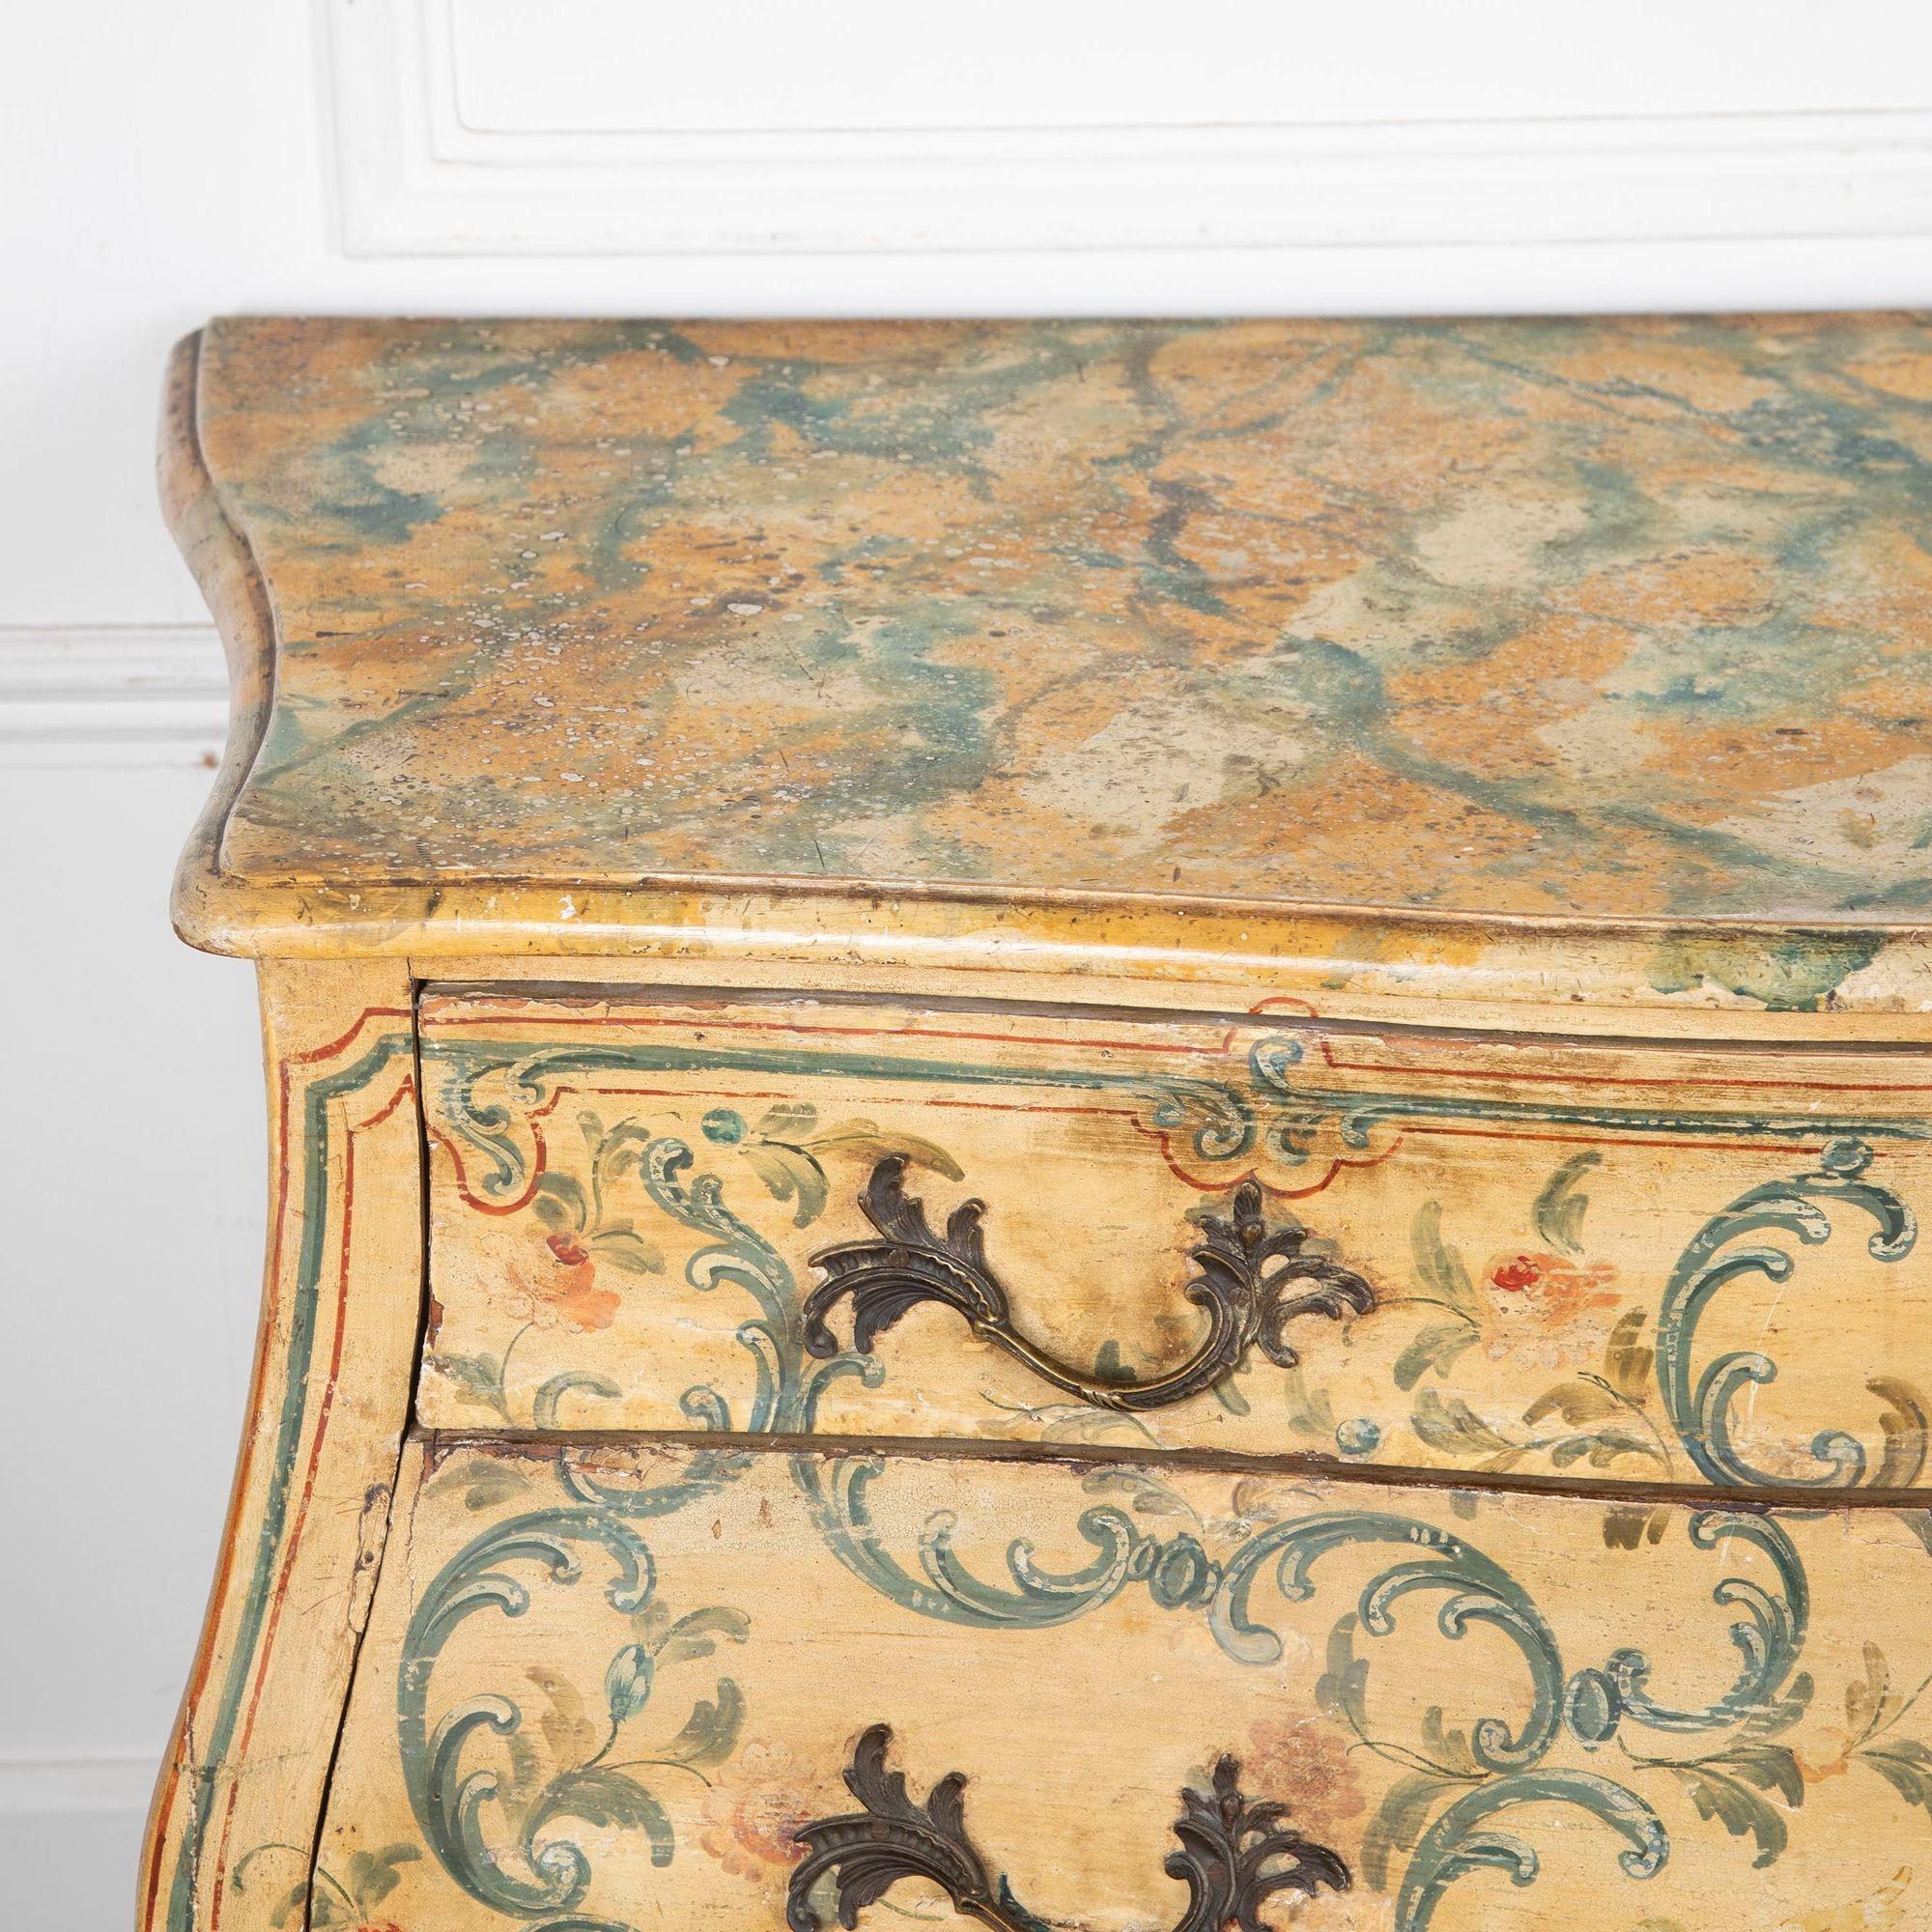 A beautiful 19th Century Italian commode in 18th Century style. From the Genoa region, the commode is profusely decorated in original Rococo style.
Painting restored to one area of drawer front bottom right.